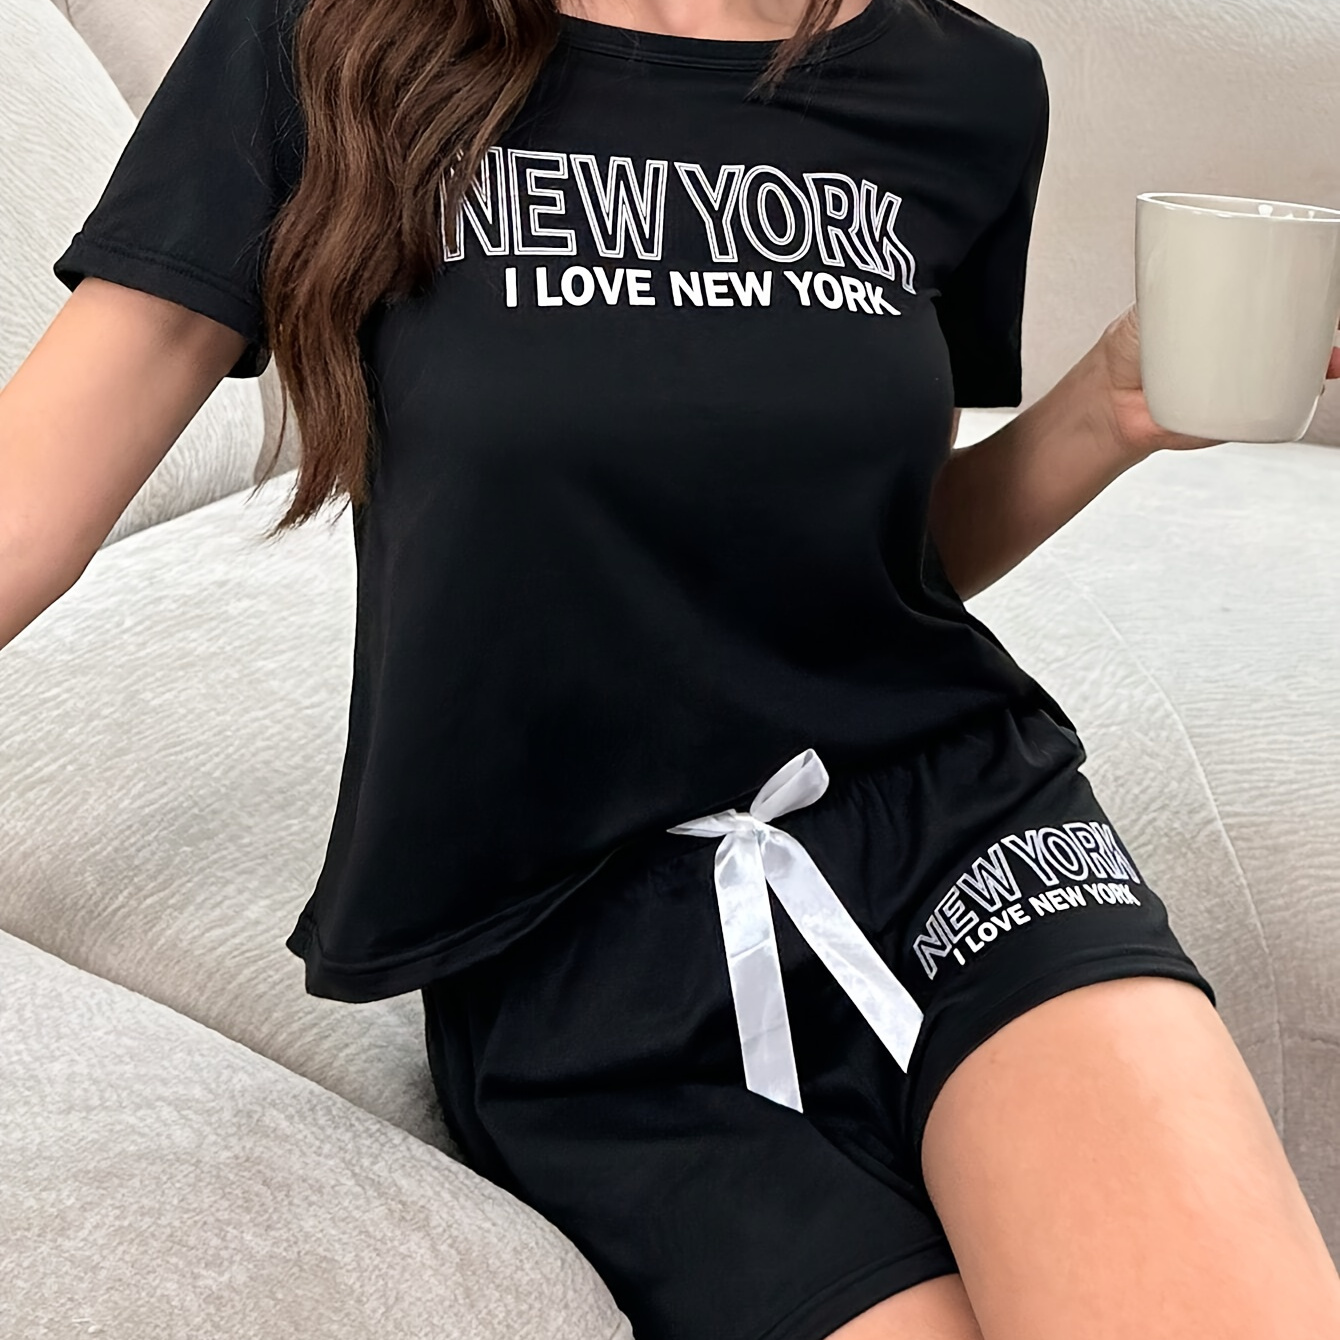 

Women's Letter Print Casual Pajama Set, Short Sleeve Round Neck Top & Bow Shorts, Comfortable Relaxed Fit